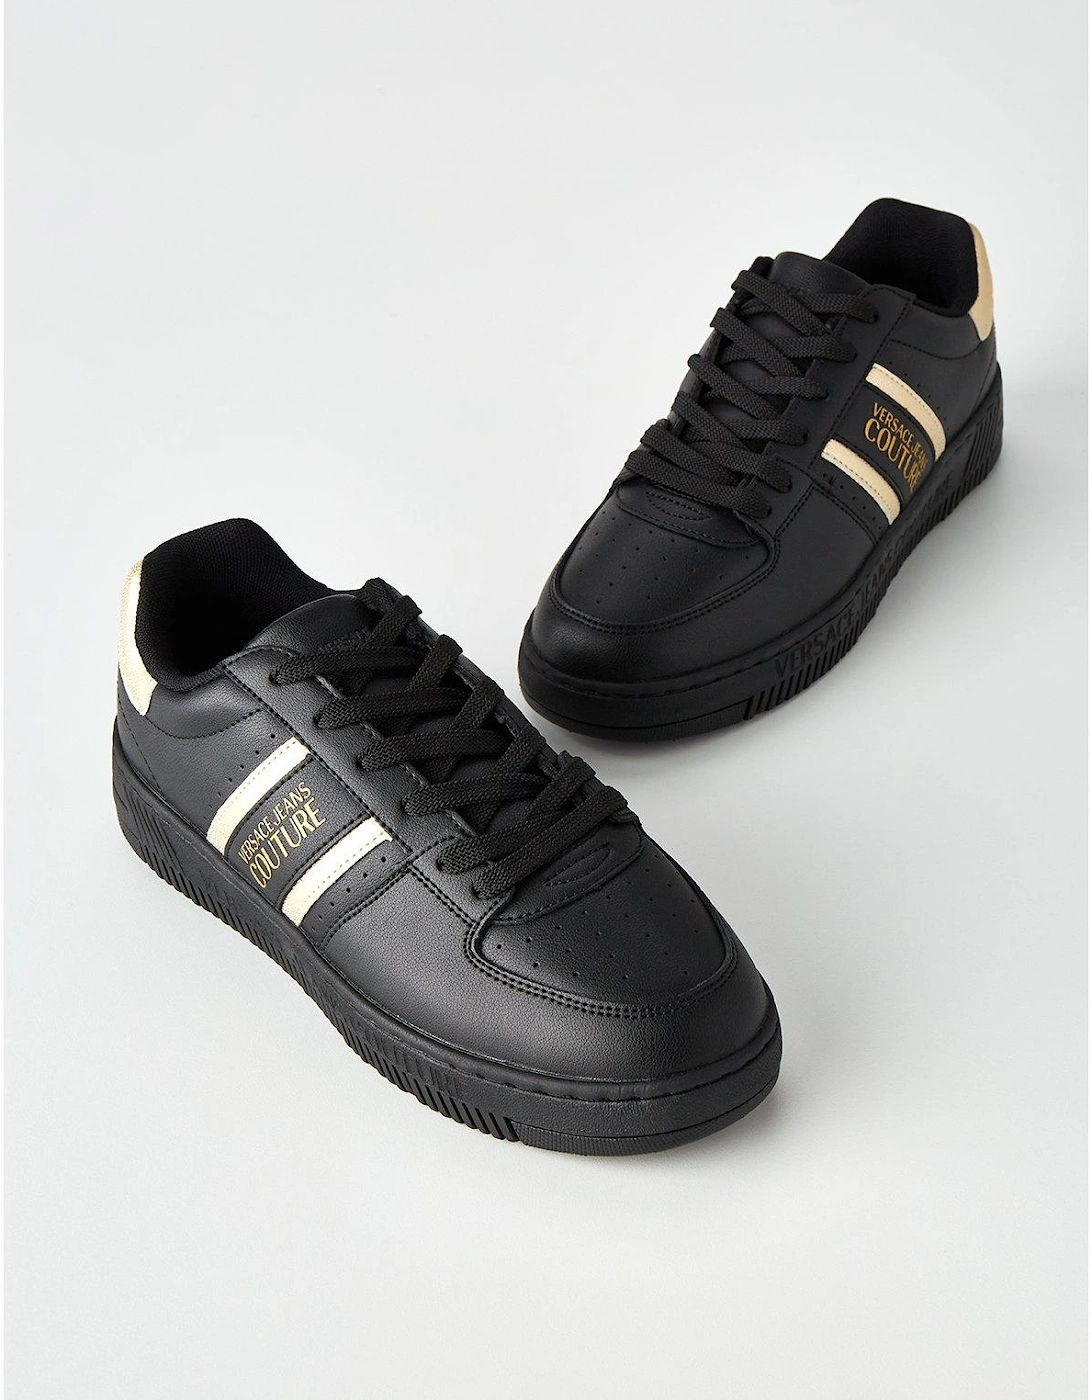 Jeans Couture Logo Lace Up Trainers - Black